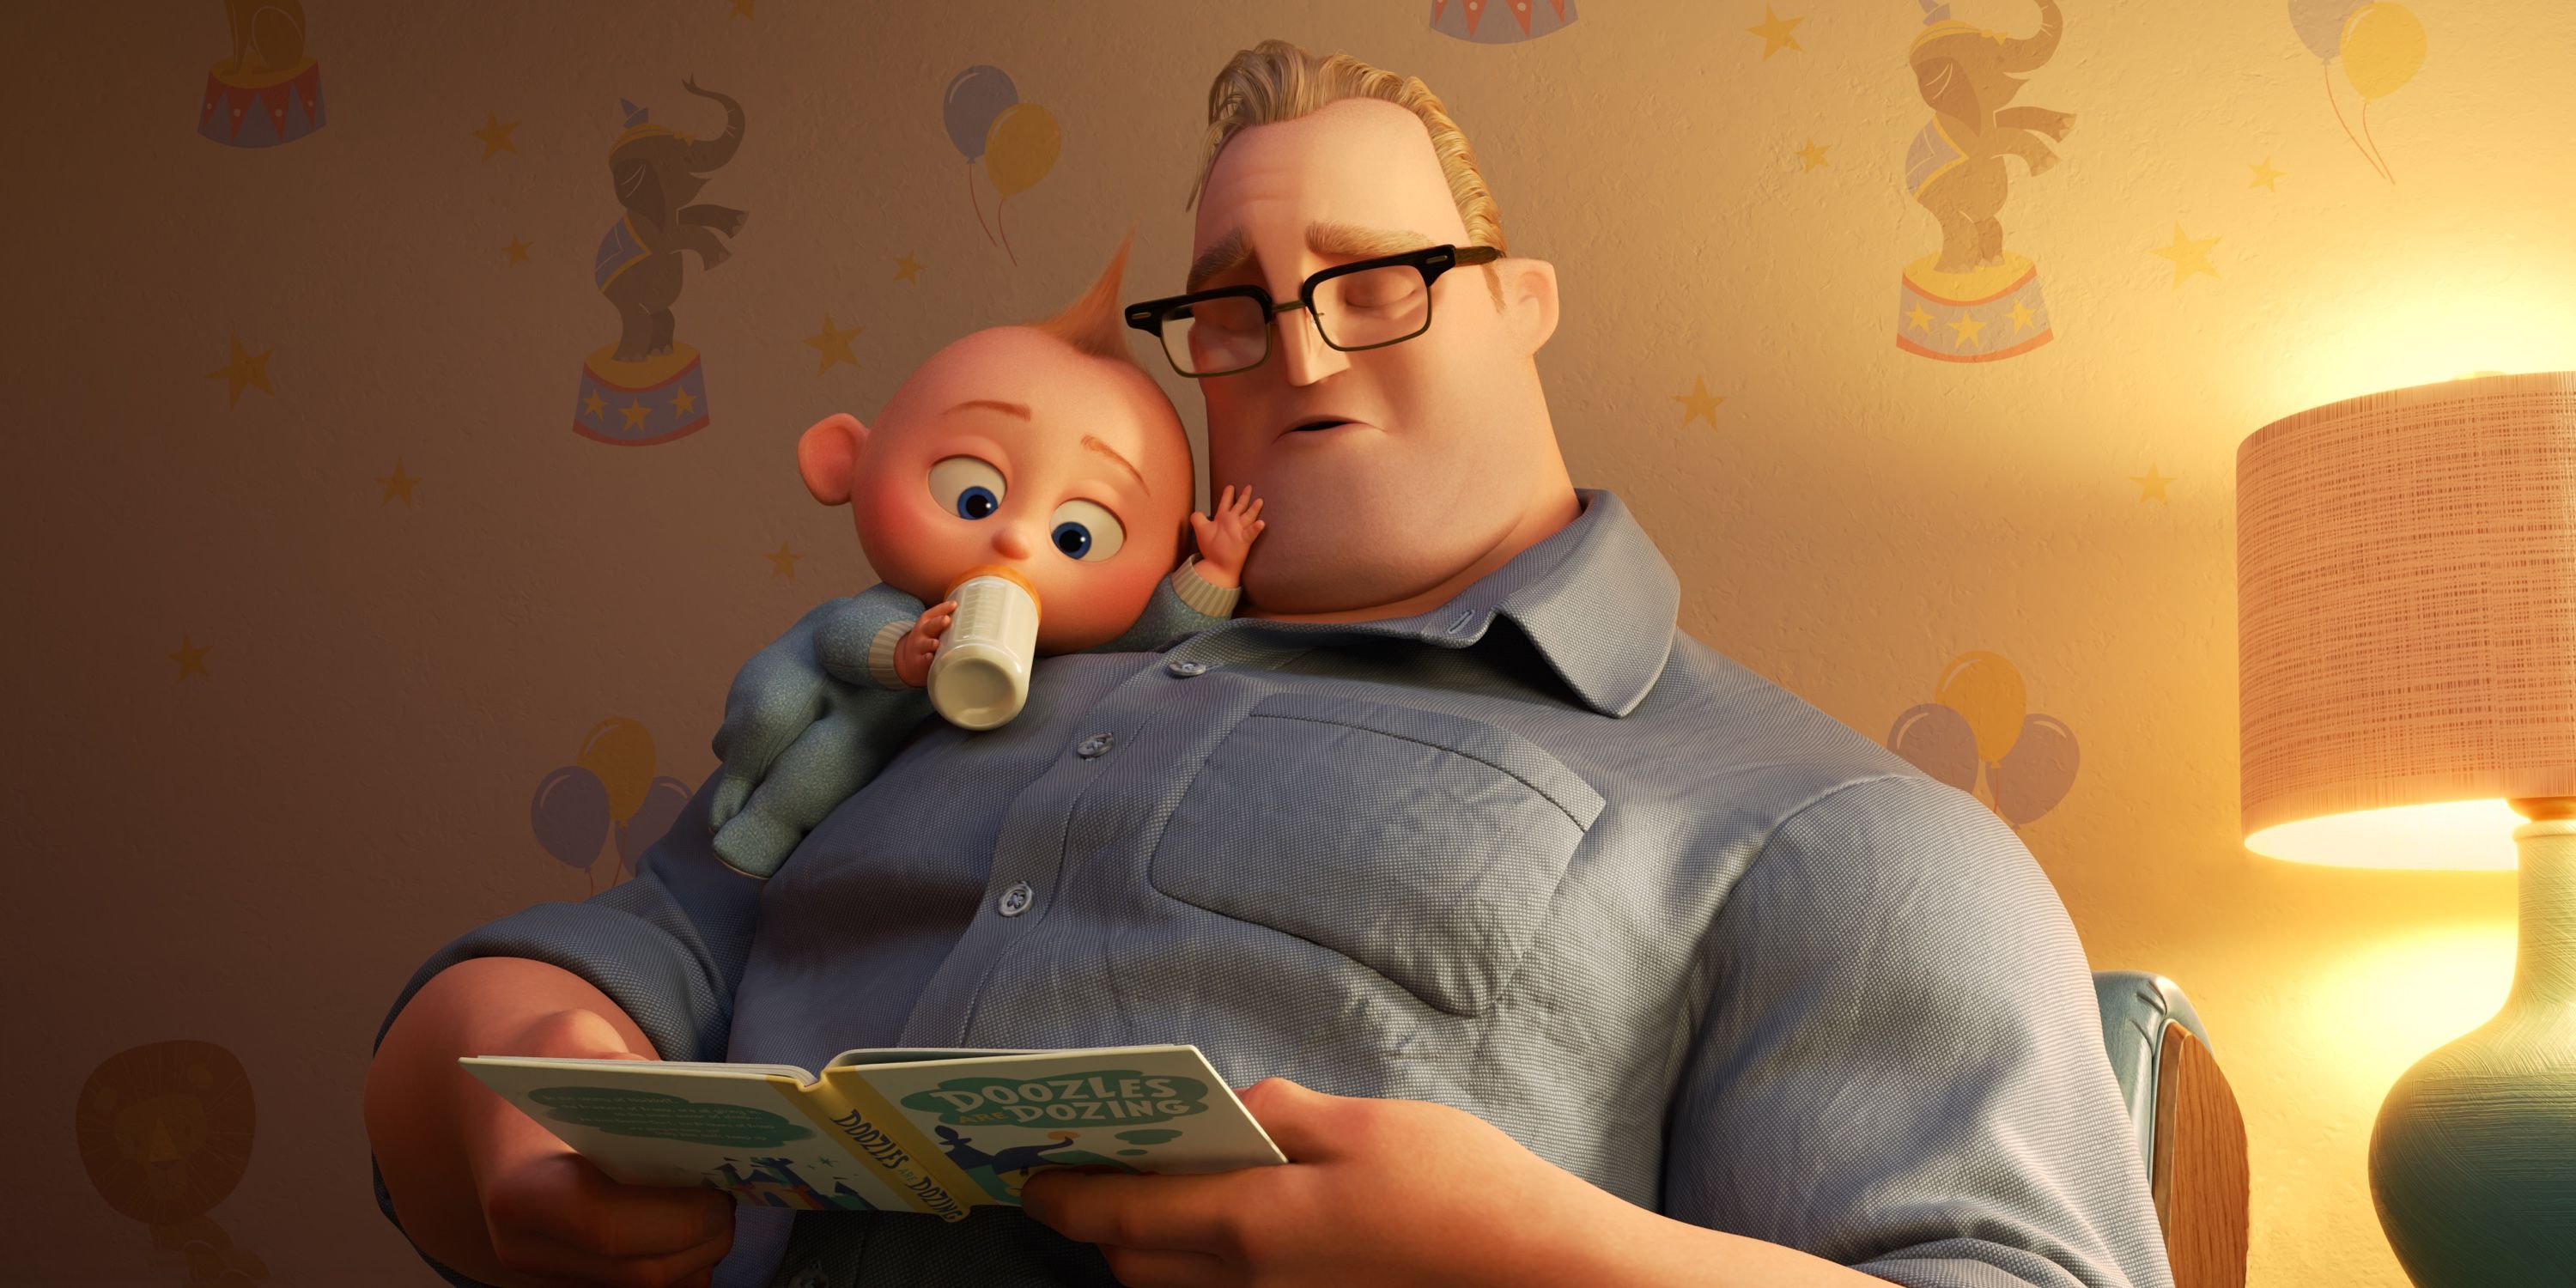 Every Pixar Movie Ranked From Worst To Best (Including Luca)